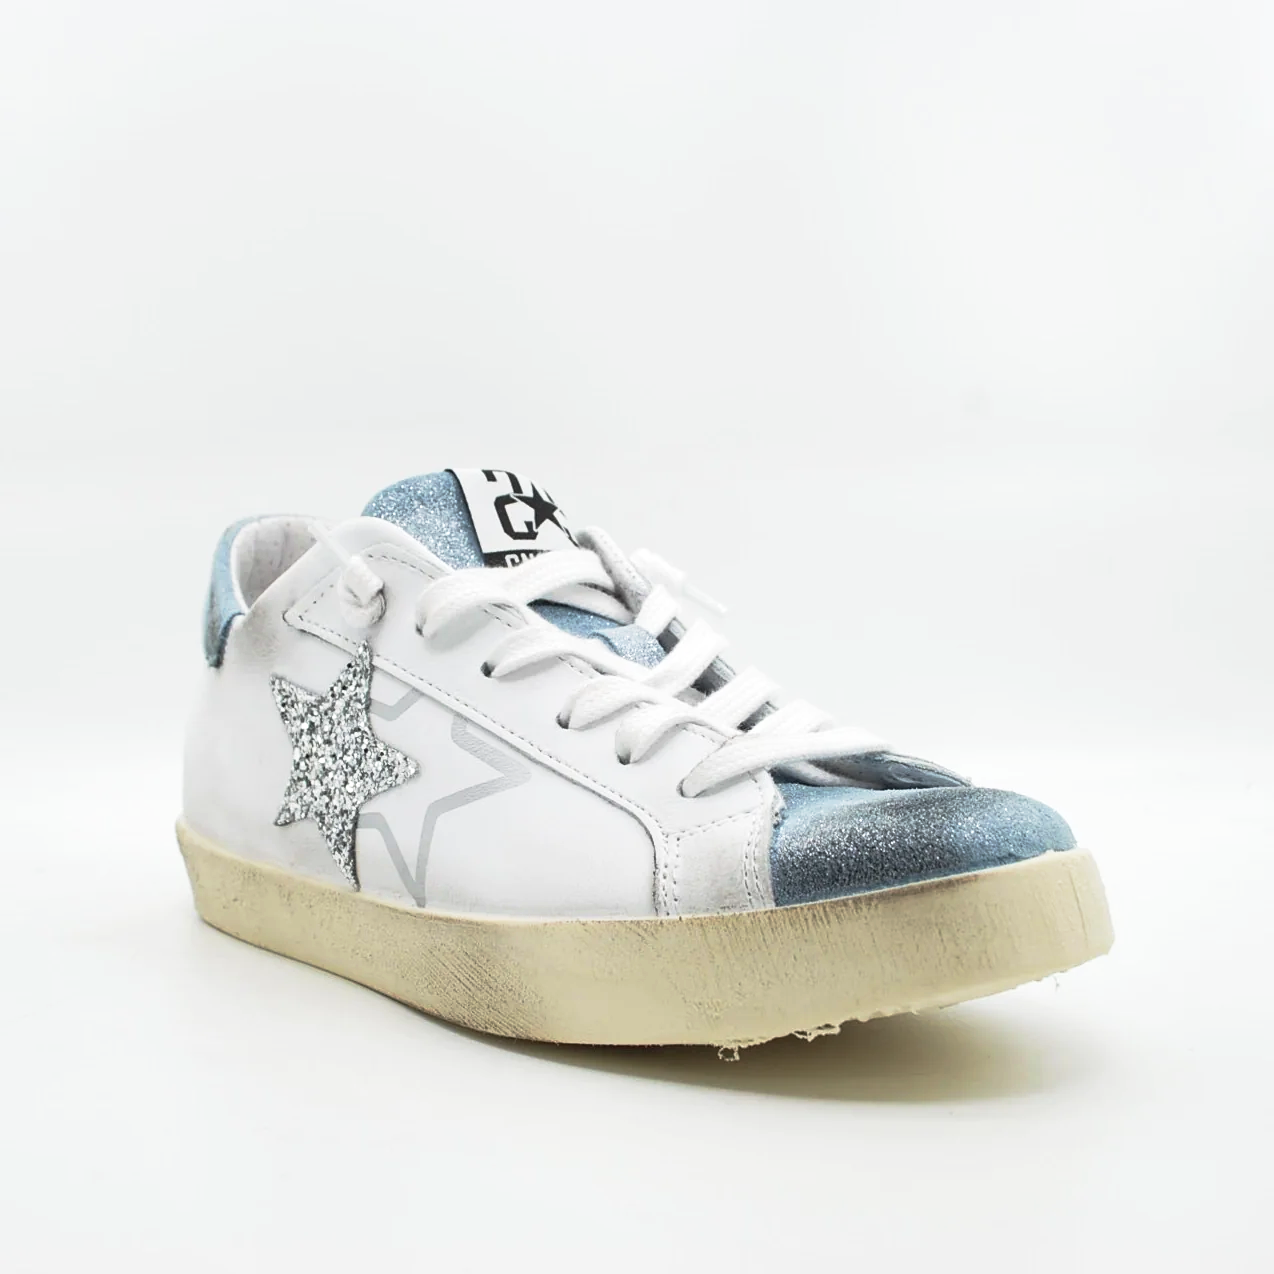 sneakers-two-star-low-in-pelle-sneakers-2_dffe576b-17dc-41fd-a76c-5e25a4f00f35.png